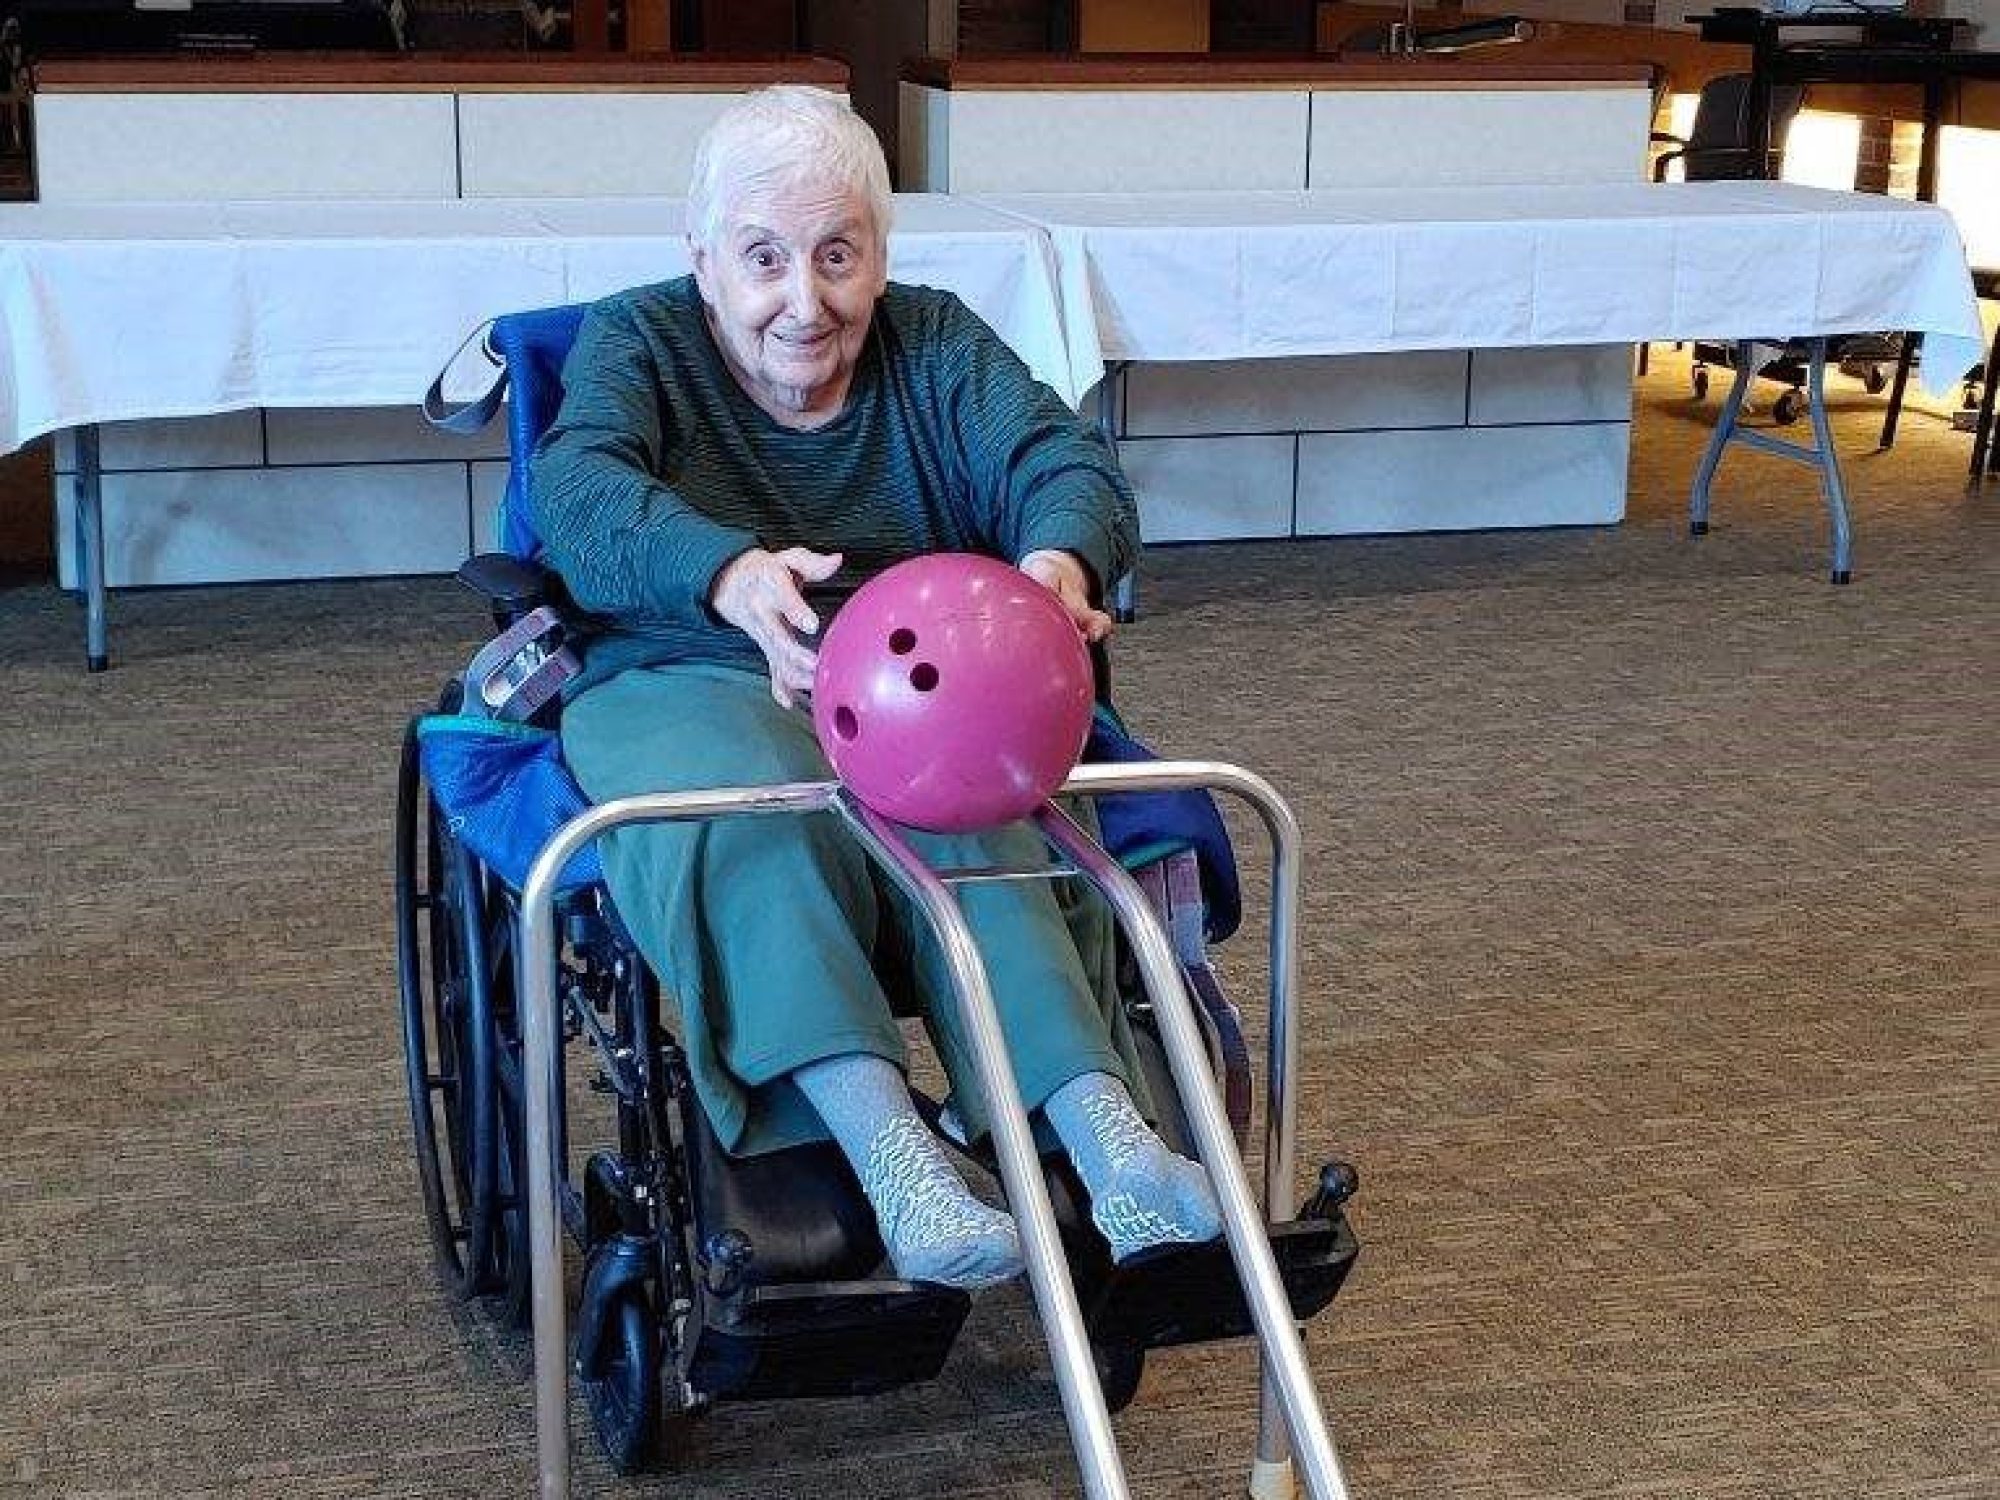 A resident bowling